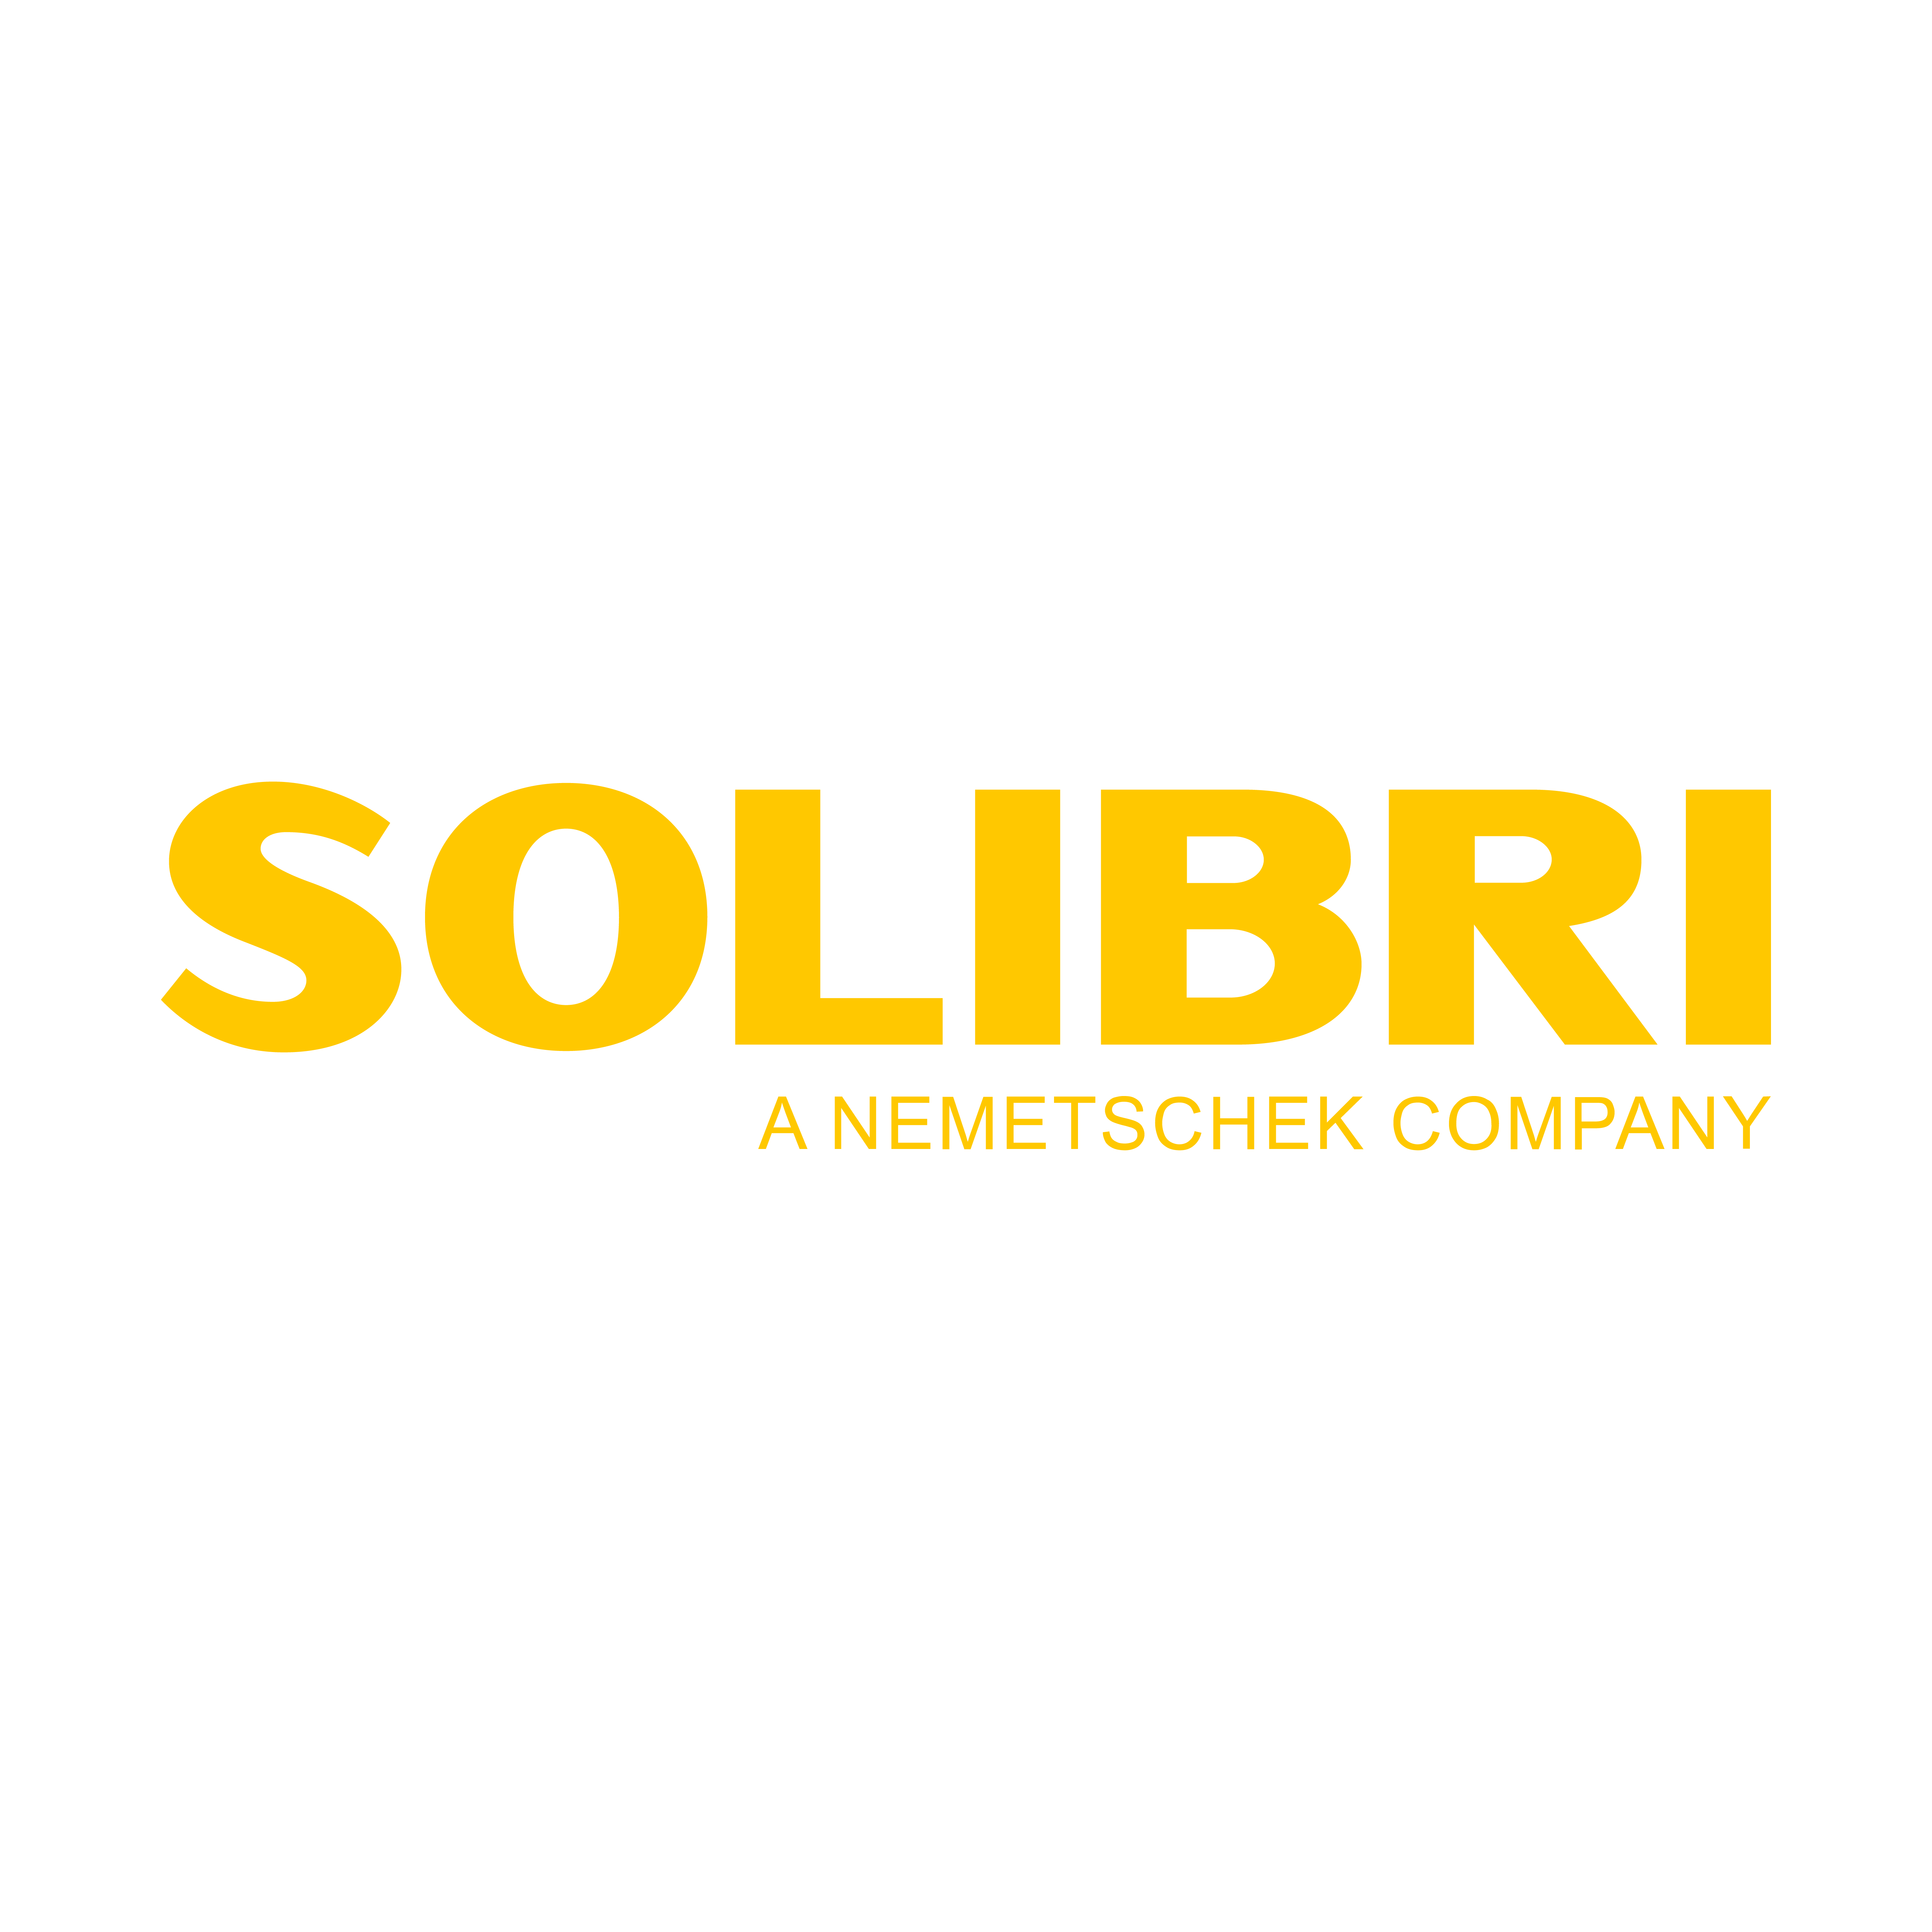 Experience the next level of quality assurance and model checking with Solibri at DIMENSION PLUS. Ensure compliance, detect clashes, and optimize your BIM processes with our expert solutions tailored for Solibri.